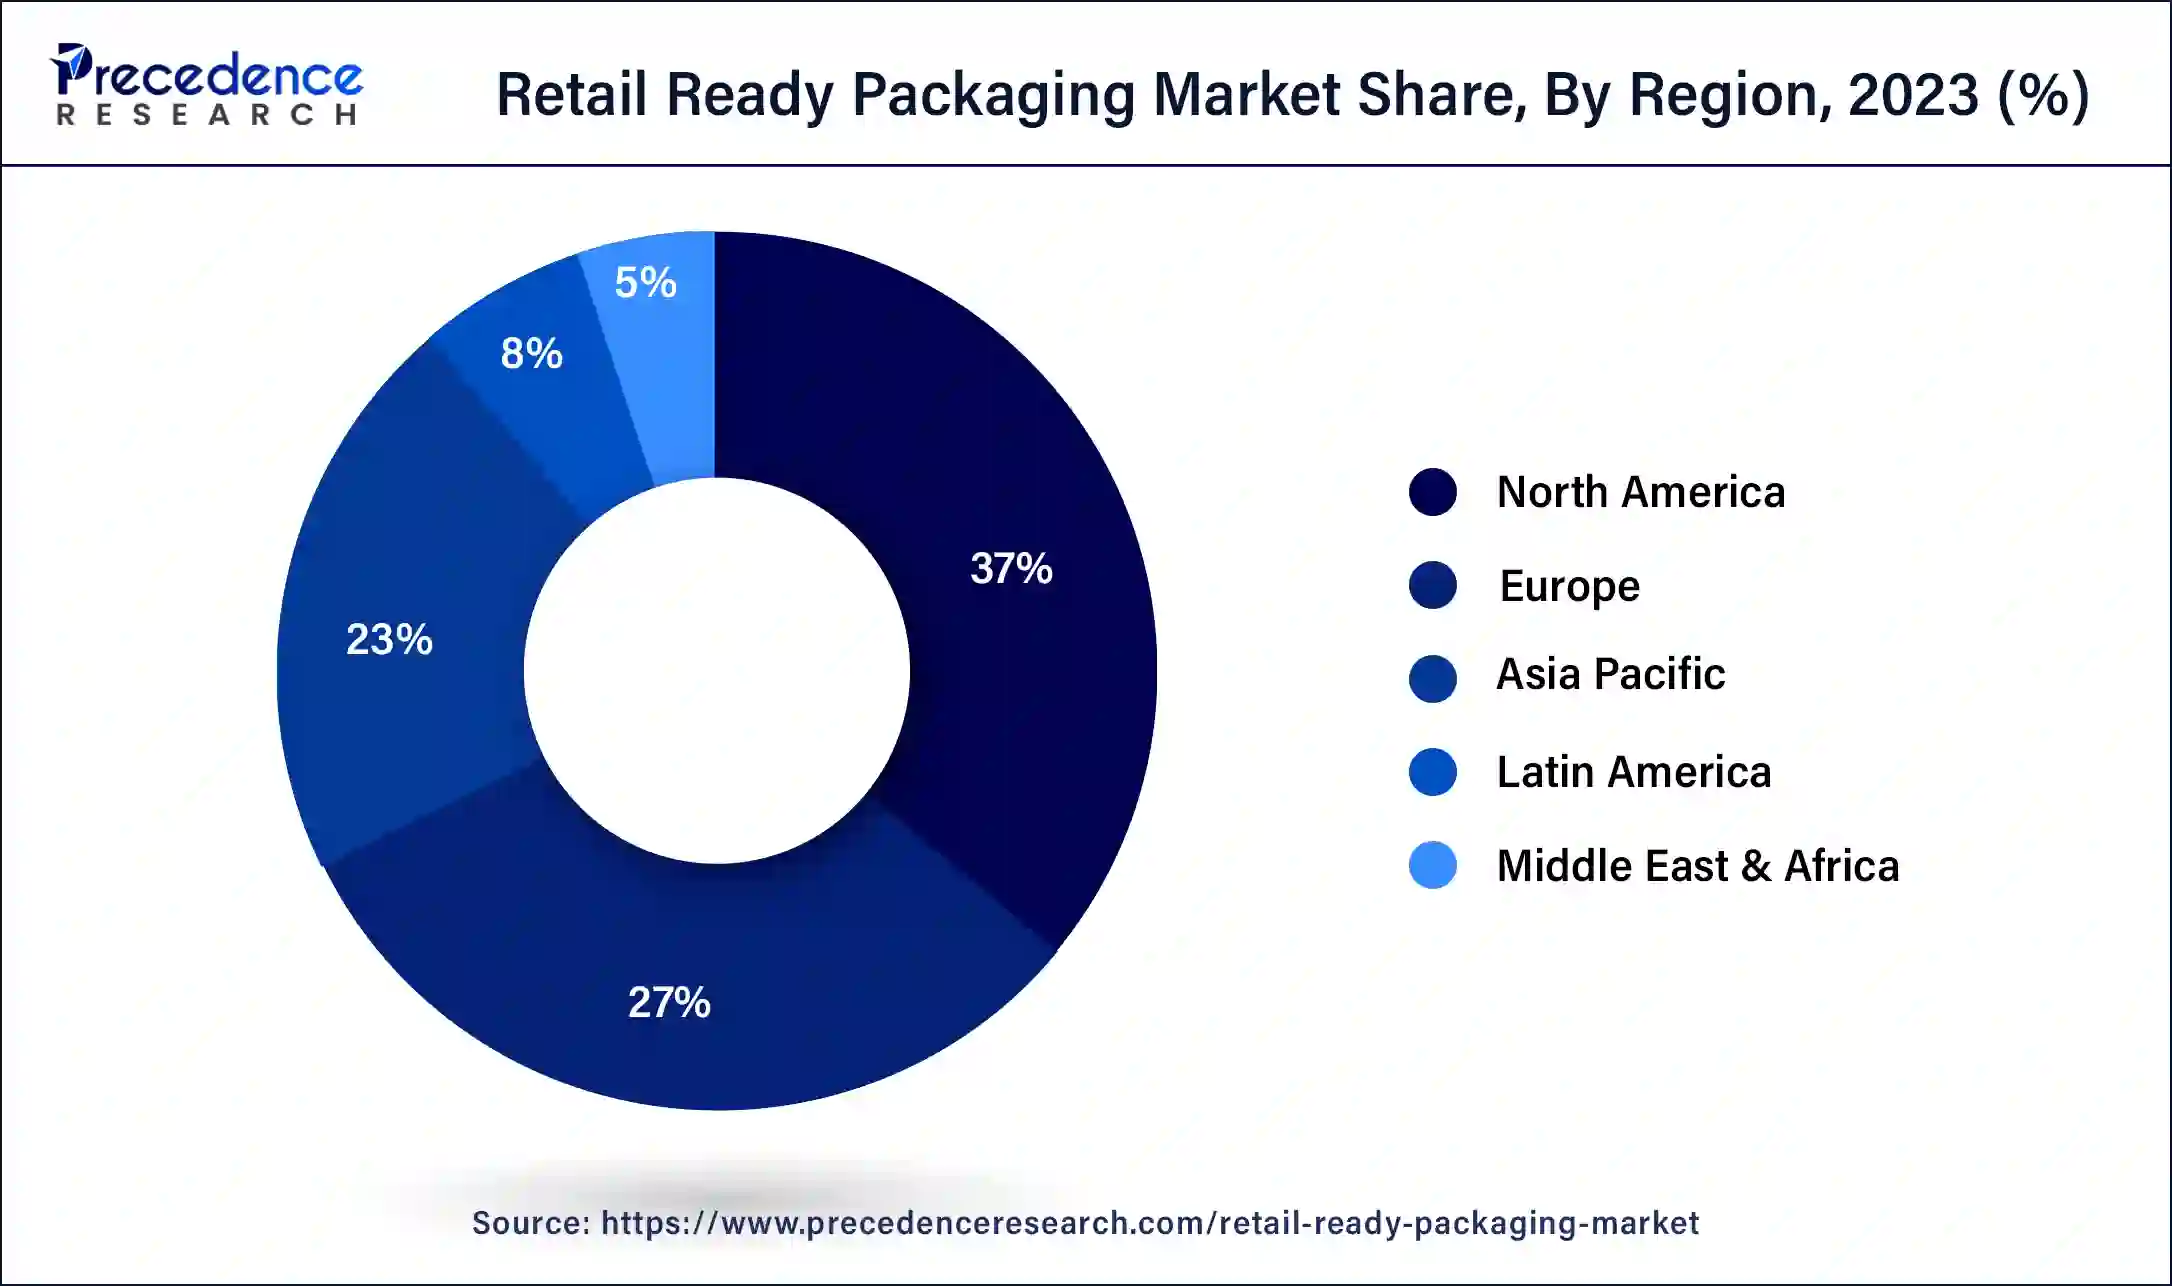 Retail Ready Packaging Market Share, By Region, 2023 (%)